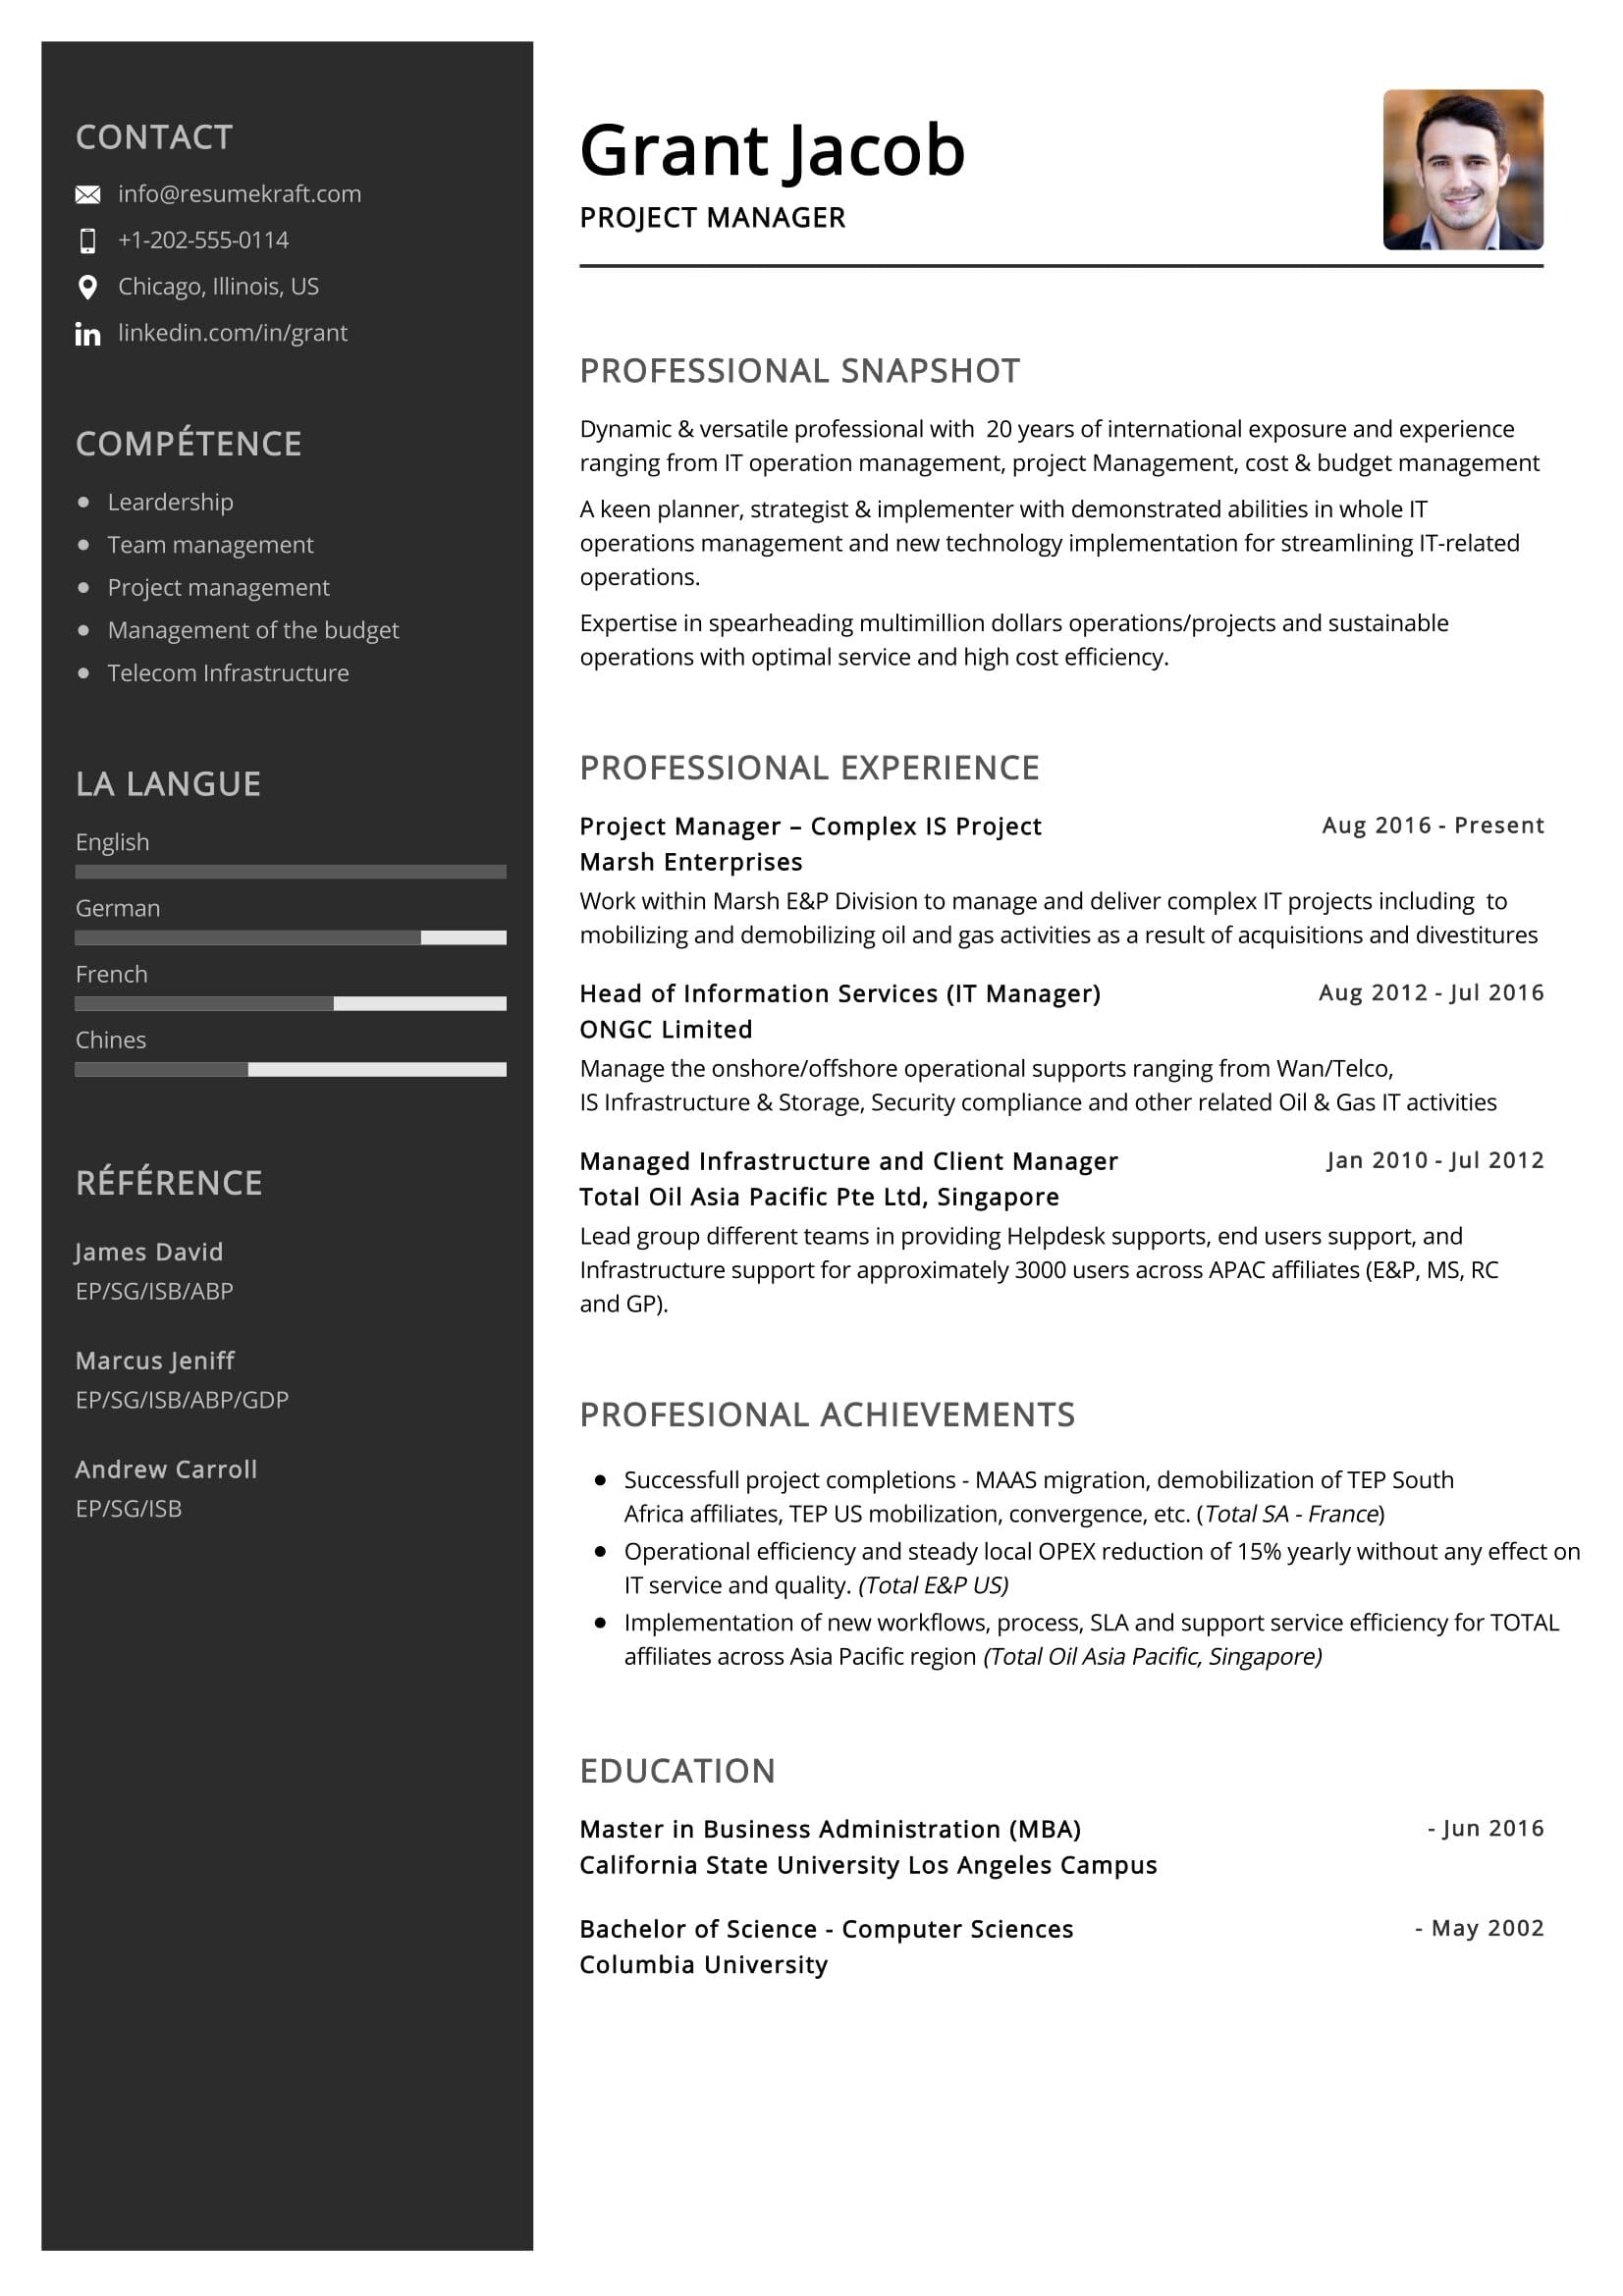 Resume-Sample-of-Project-Manager 10 Effective Ways To Get More Out Of Professional Resume Writing Services in Indianapolis IN